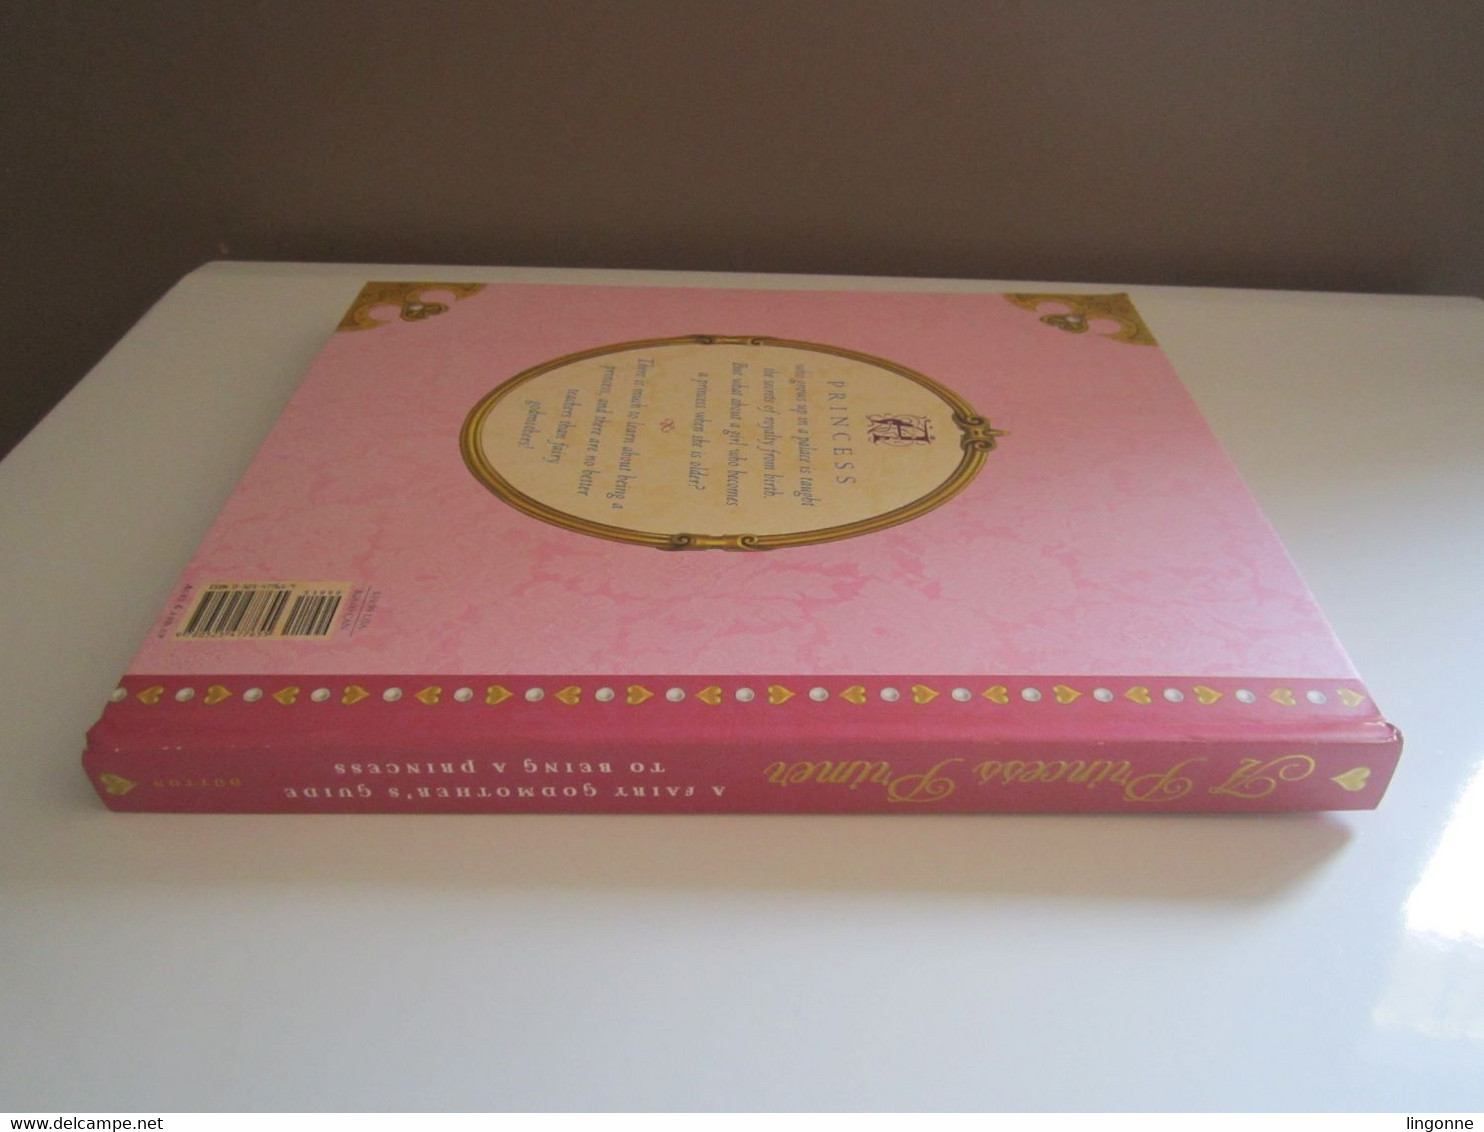 A Princess Primer: A Fairy Godmothers Guide to Being a Princess by Stephanie - Copright 2006